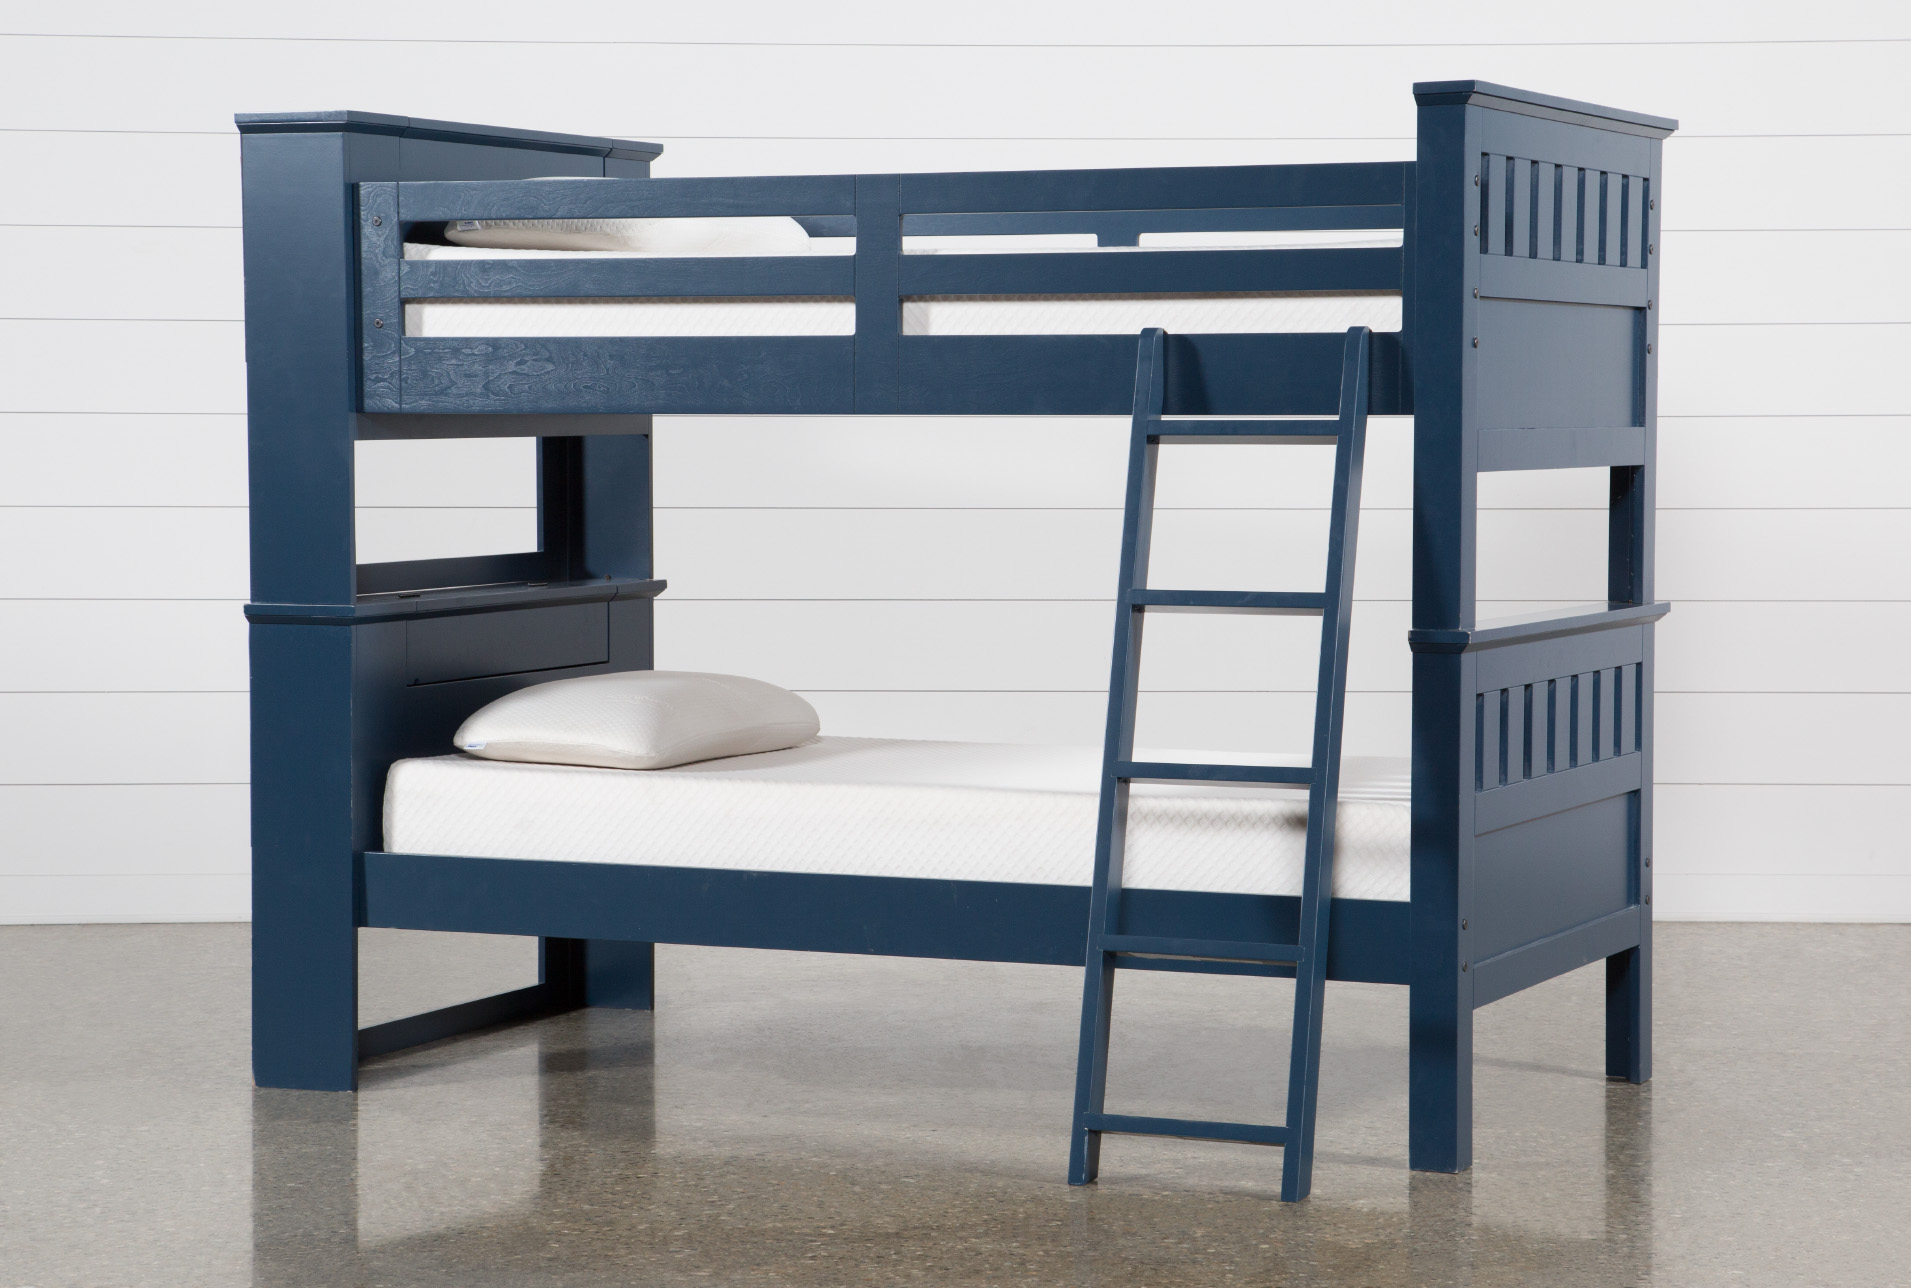 bunk beds with headboard storage